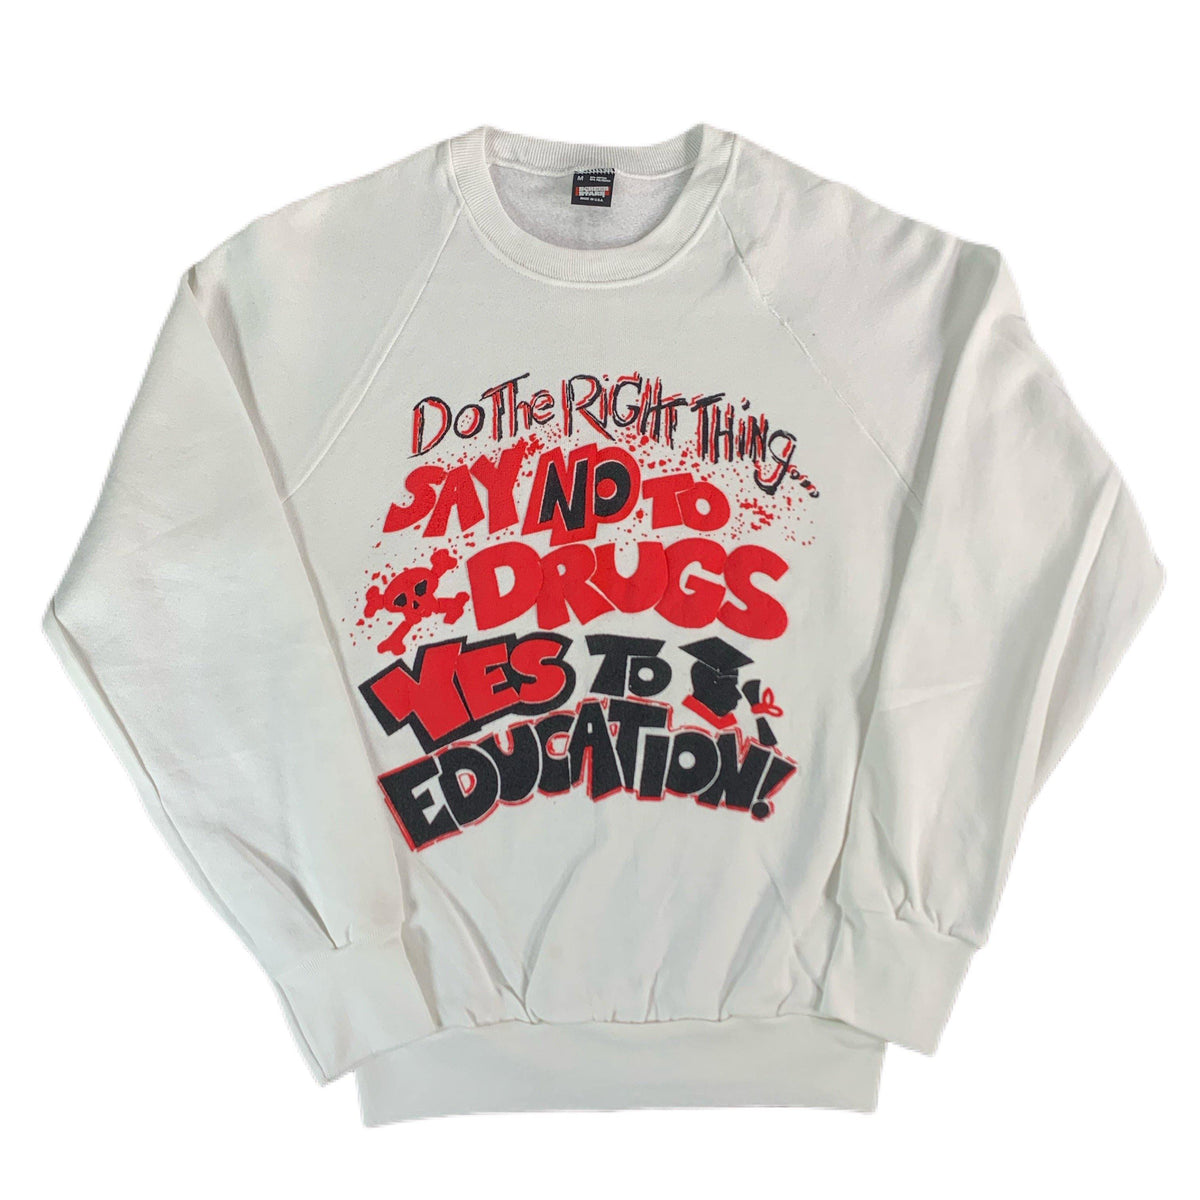 Vintage Say No To Drugs &quot;Yes To Education&quot; Crewneck Sweatshirt - jointcustodydc